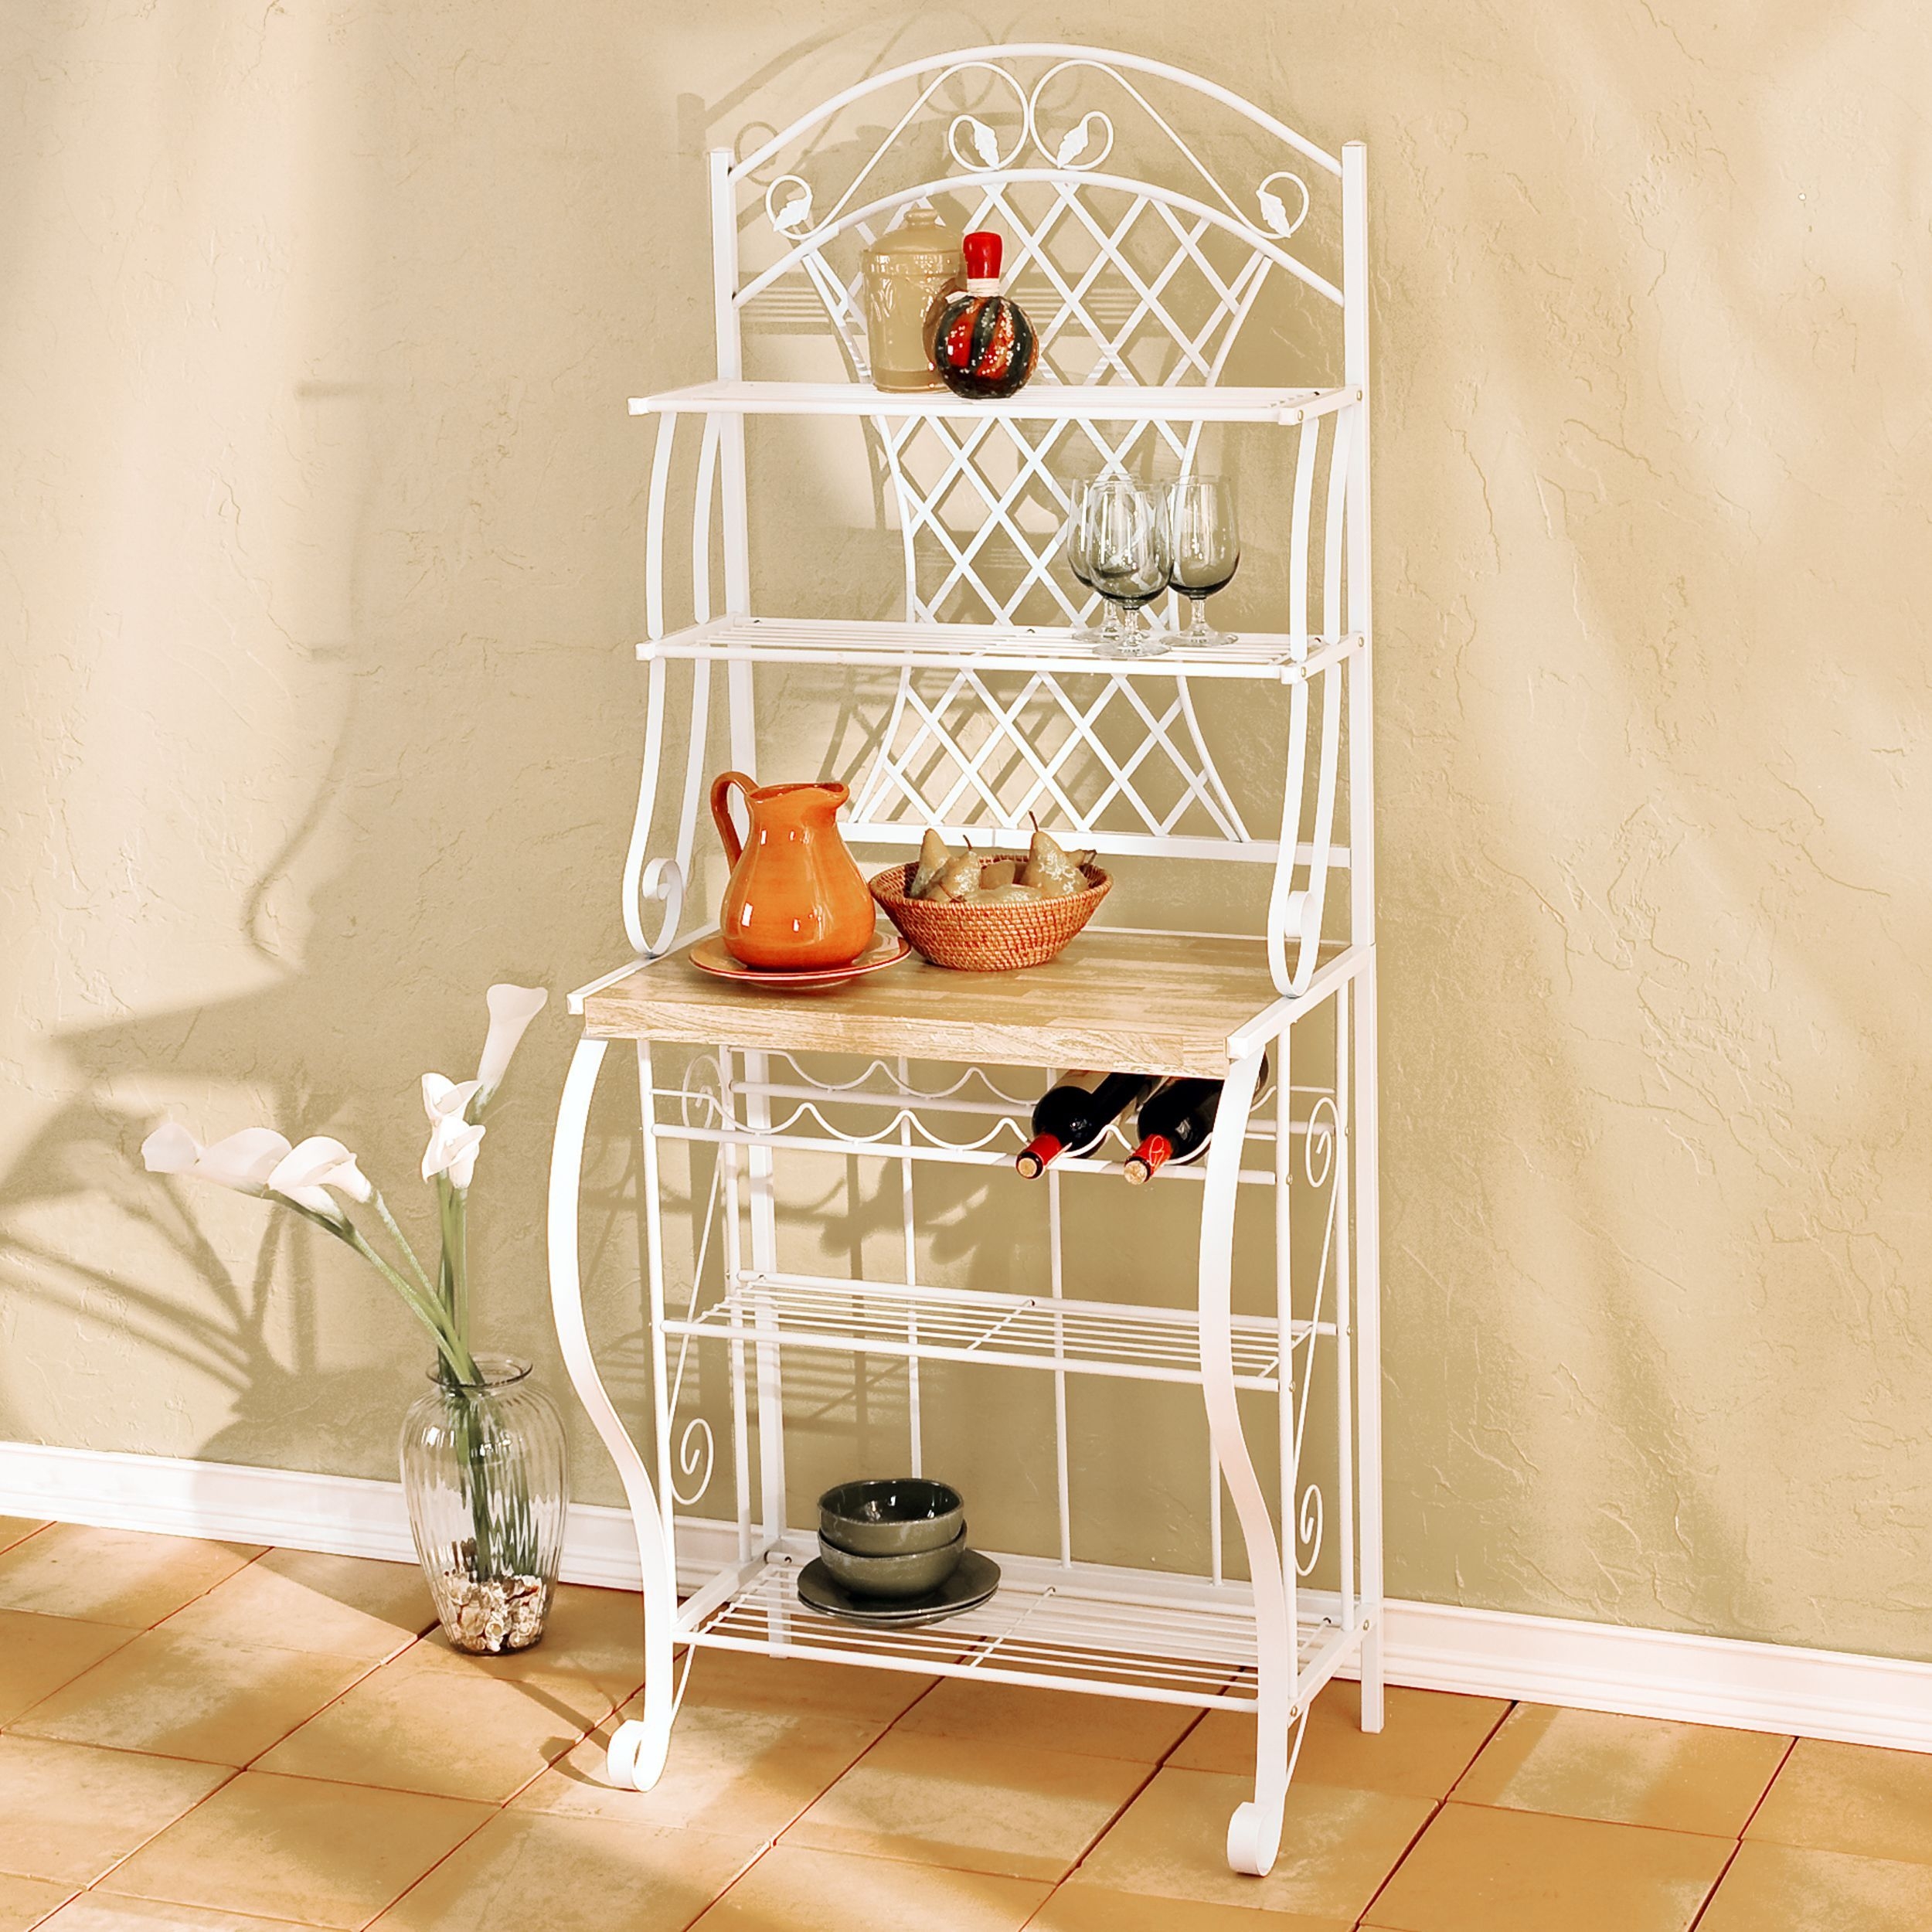 Trellis Kitchen Baker's Rack a Great Looking Standing Metal Storage with Wooden Shelf Organizer for Your Home This Decorated Bakers Rack Is a Beautiful Kitchen Furniture or for Your Pantry. Use It to Showcase Your Wine Collection on Its Shelves